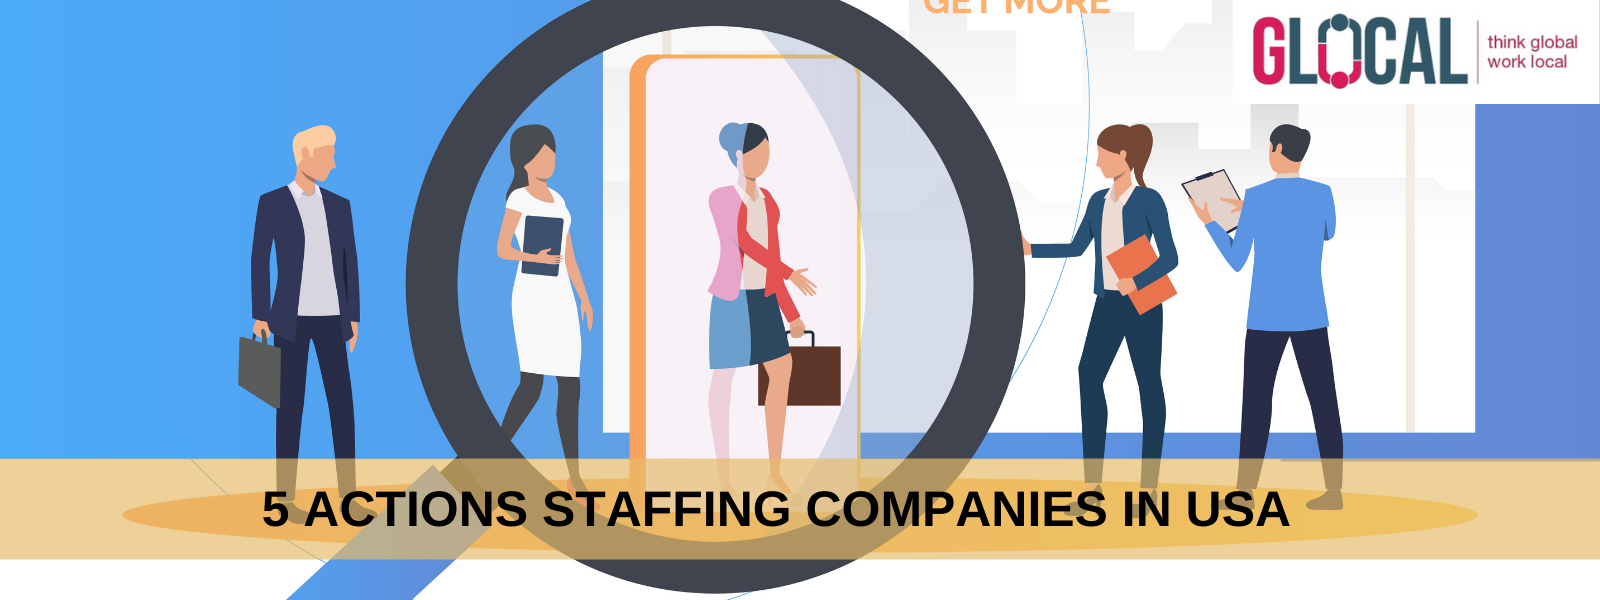 5 Actions Staffing Companies in USA